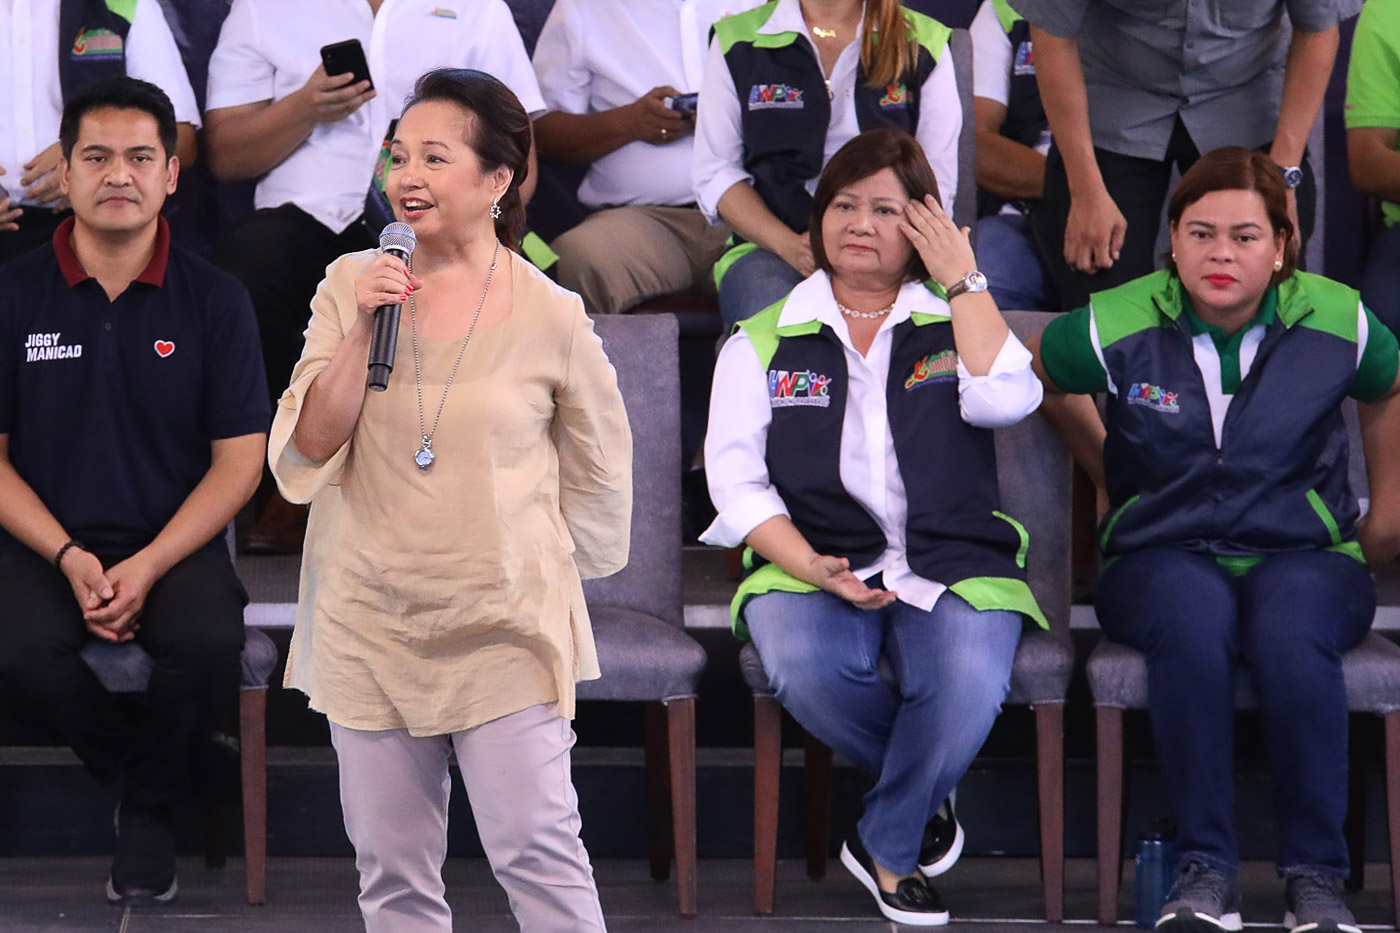 APPEAL TO PAMPANGA. House Speaker Gloria Macapagal Arroyo speaks at the campaign launch of Hugpong ng Pagbabago on February 12, 2019, urging Pampangueños to vote for its senatorial bets. Photo by Darren Langit/Rappler 